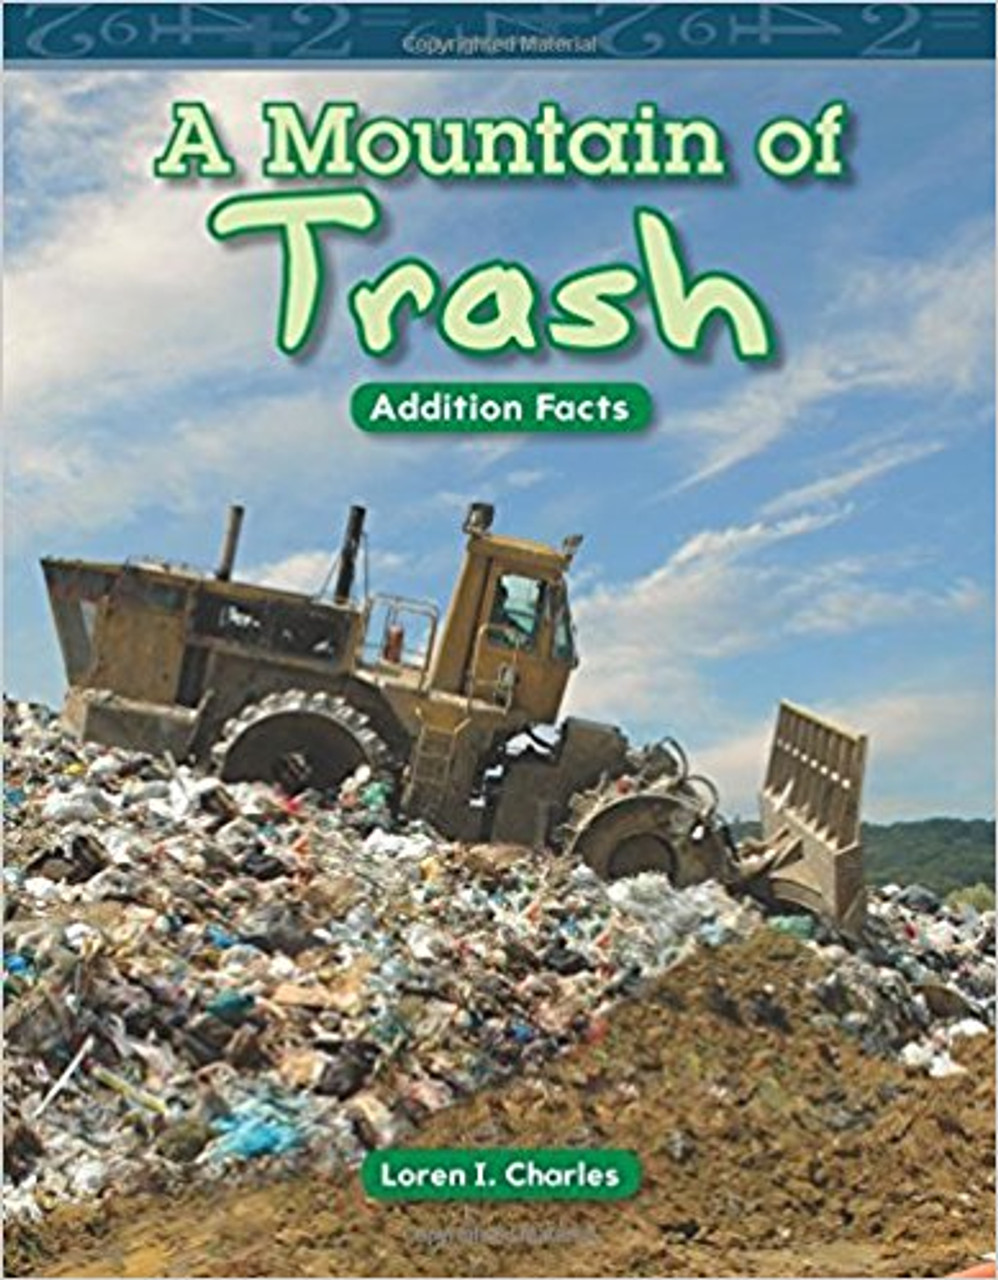 A Mountain of Trash by Loren I Charles